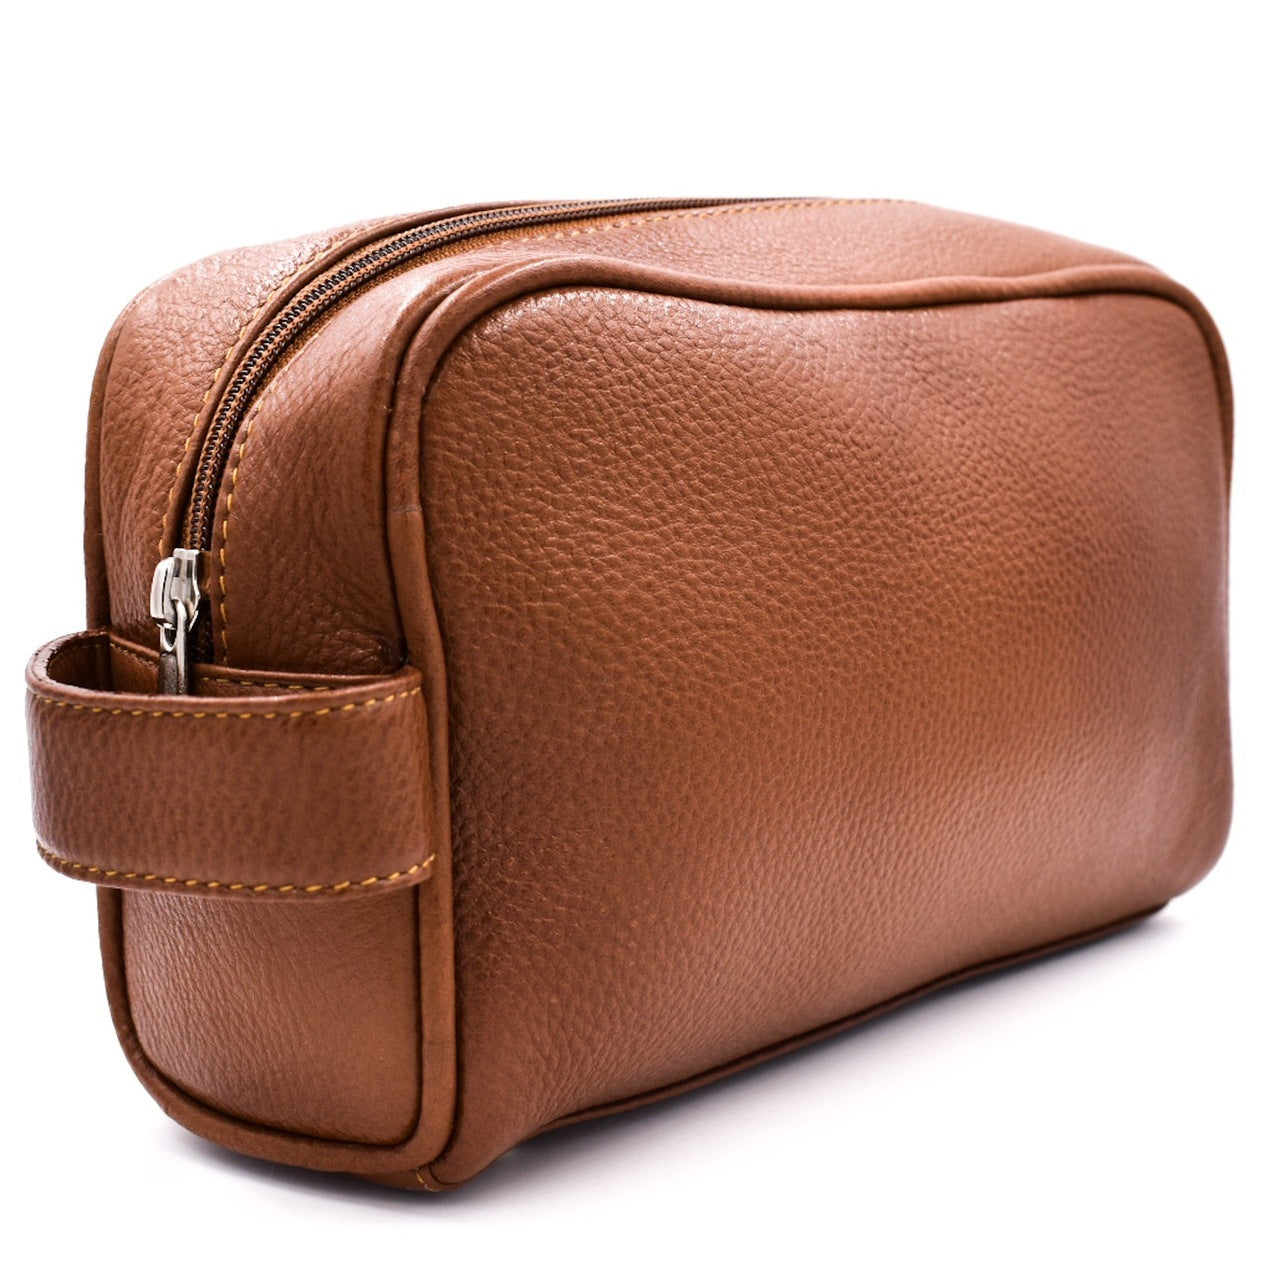 Parker Leather Saddle Dopp Kit TBSADDLE - Cyril R. Salter | Trade Suppliers of Gentlemen's Grooming Products